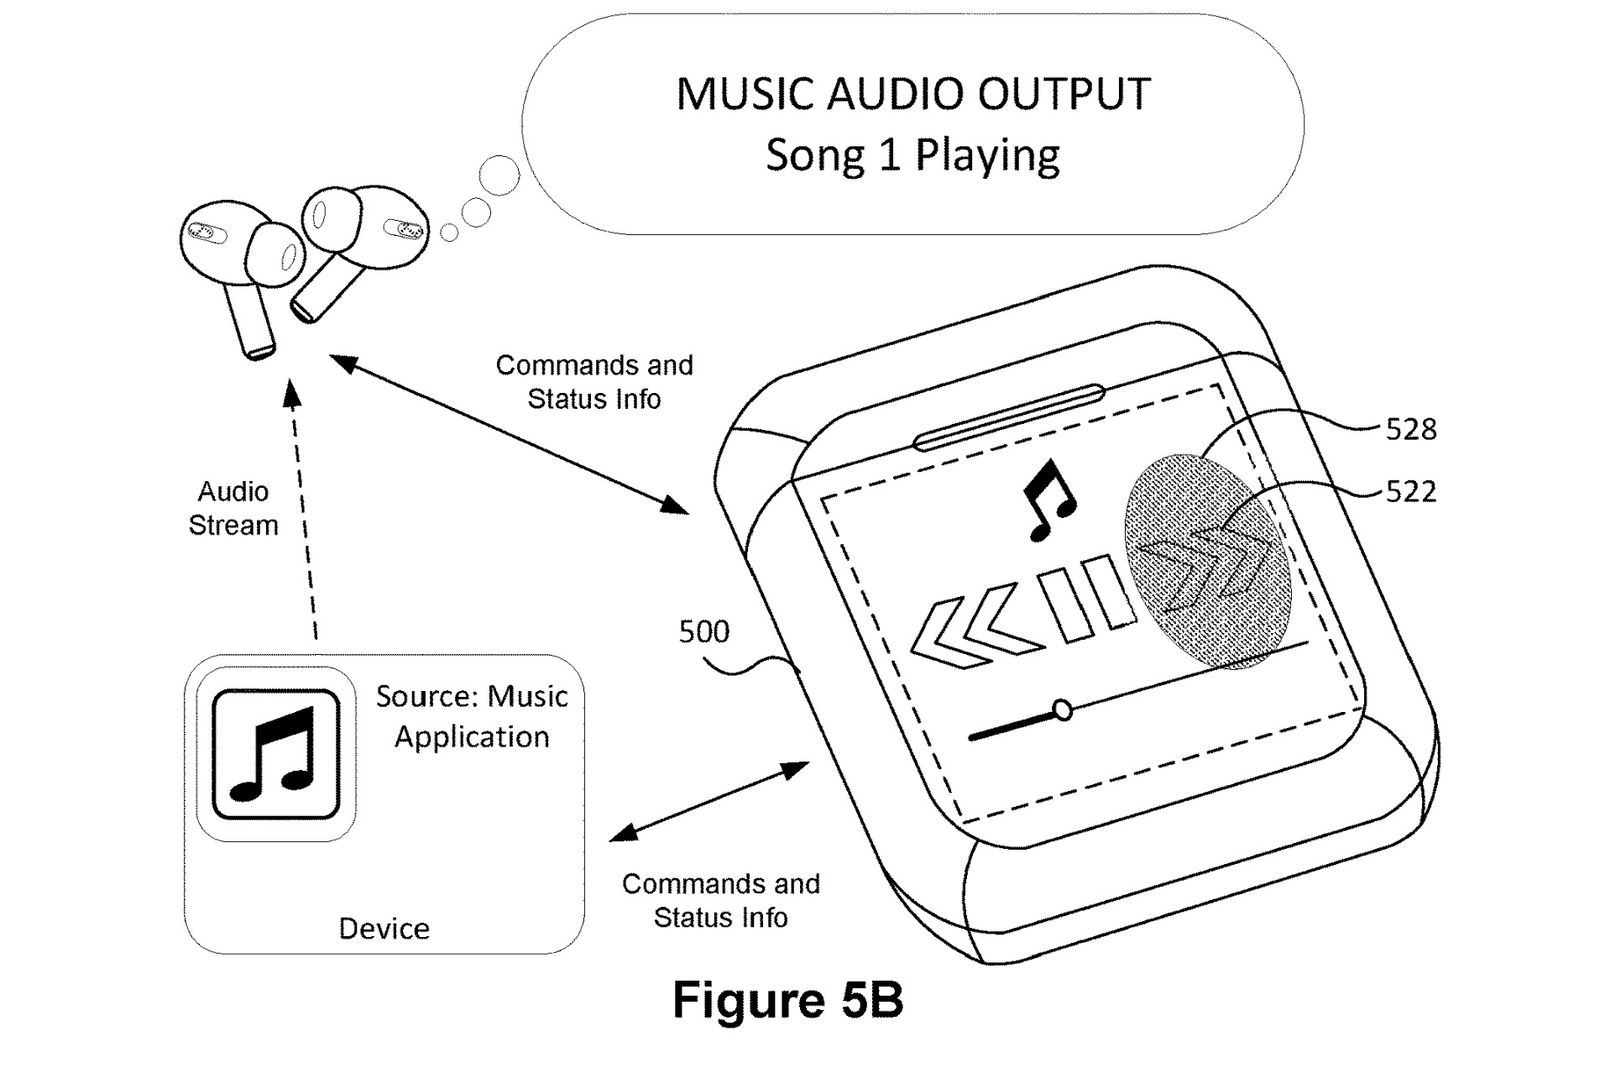 Patent design of an AirPods case with a touchscreen allowing users to control music and audio.